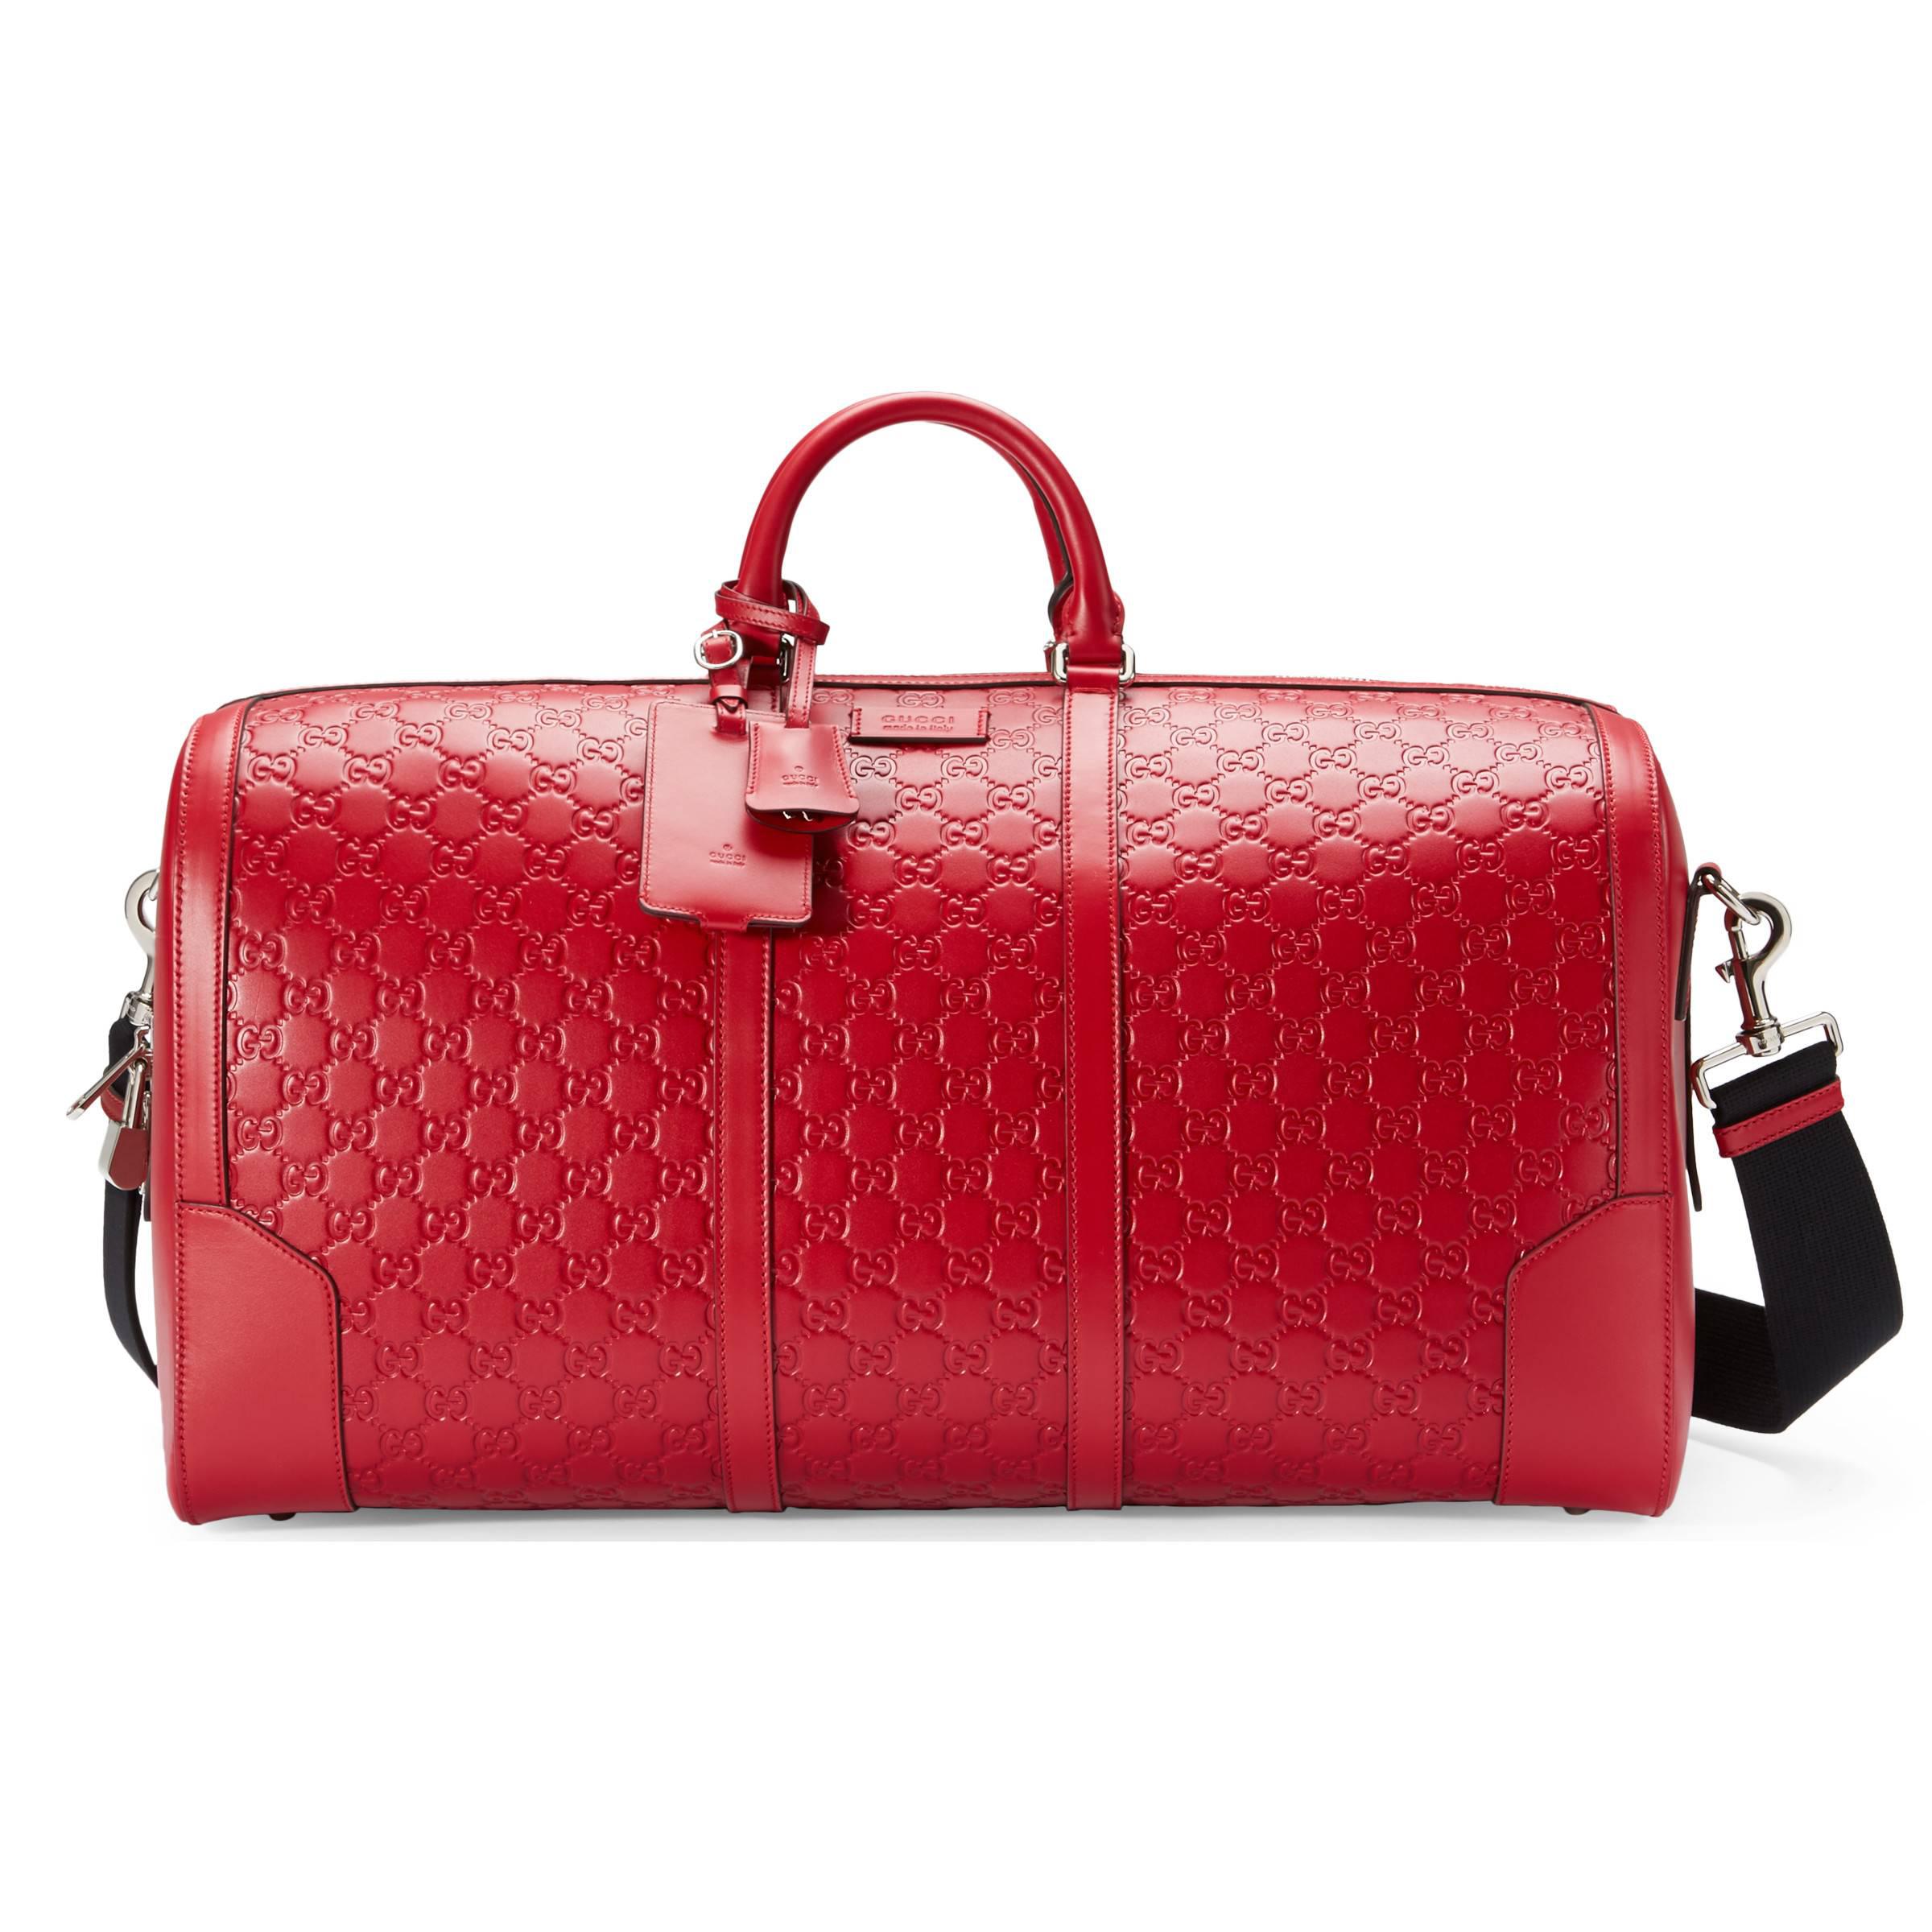 gucci duffle bag red